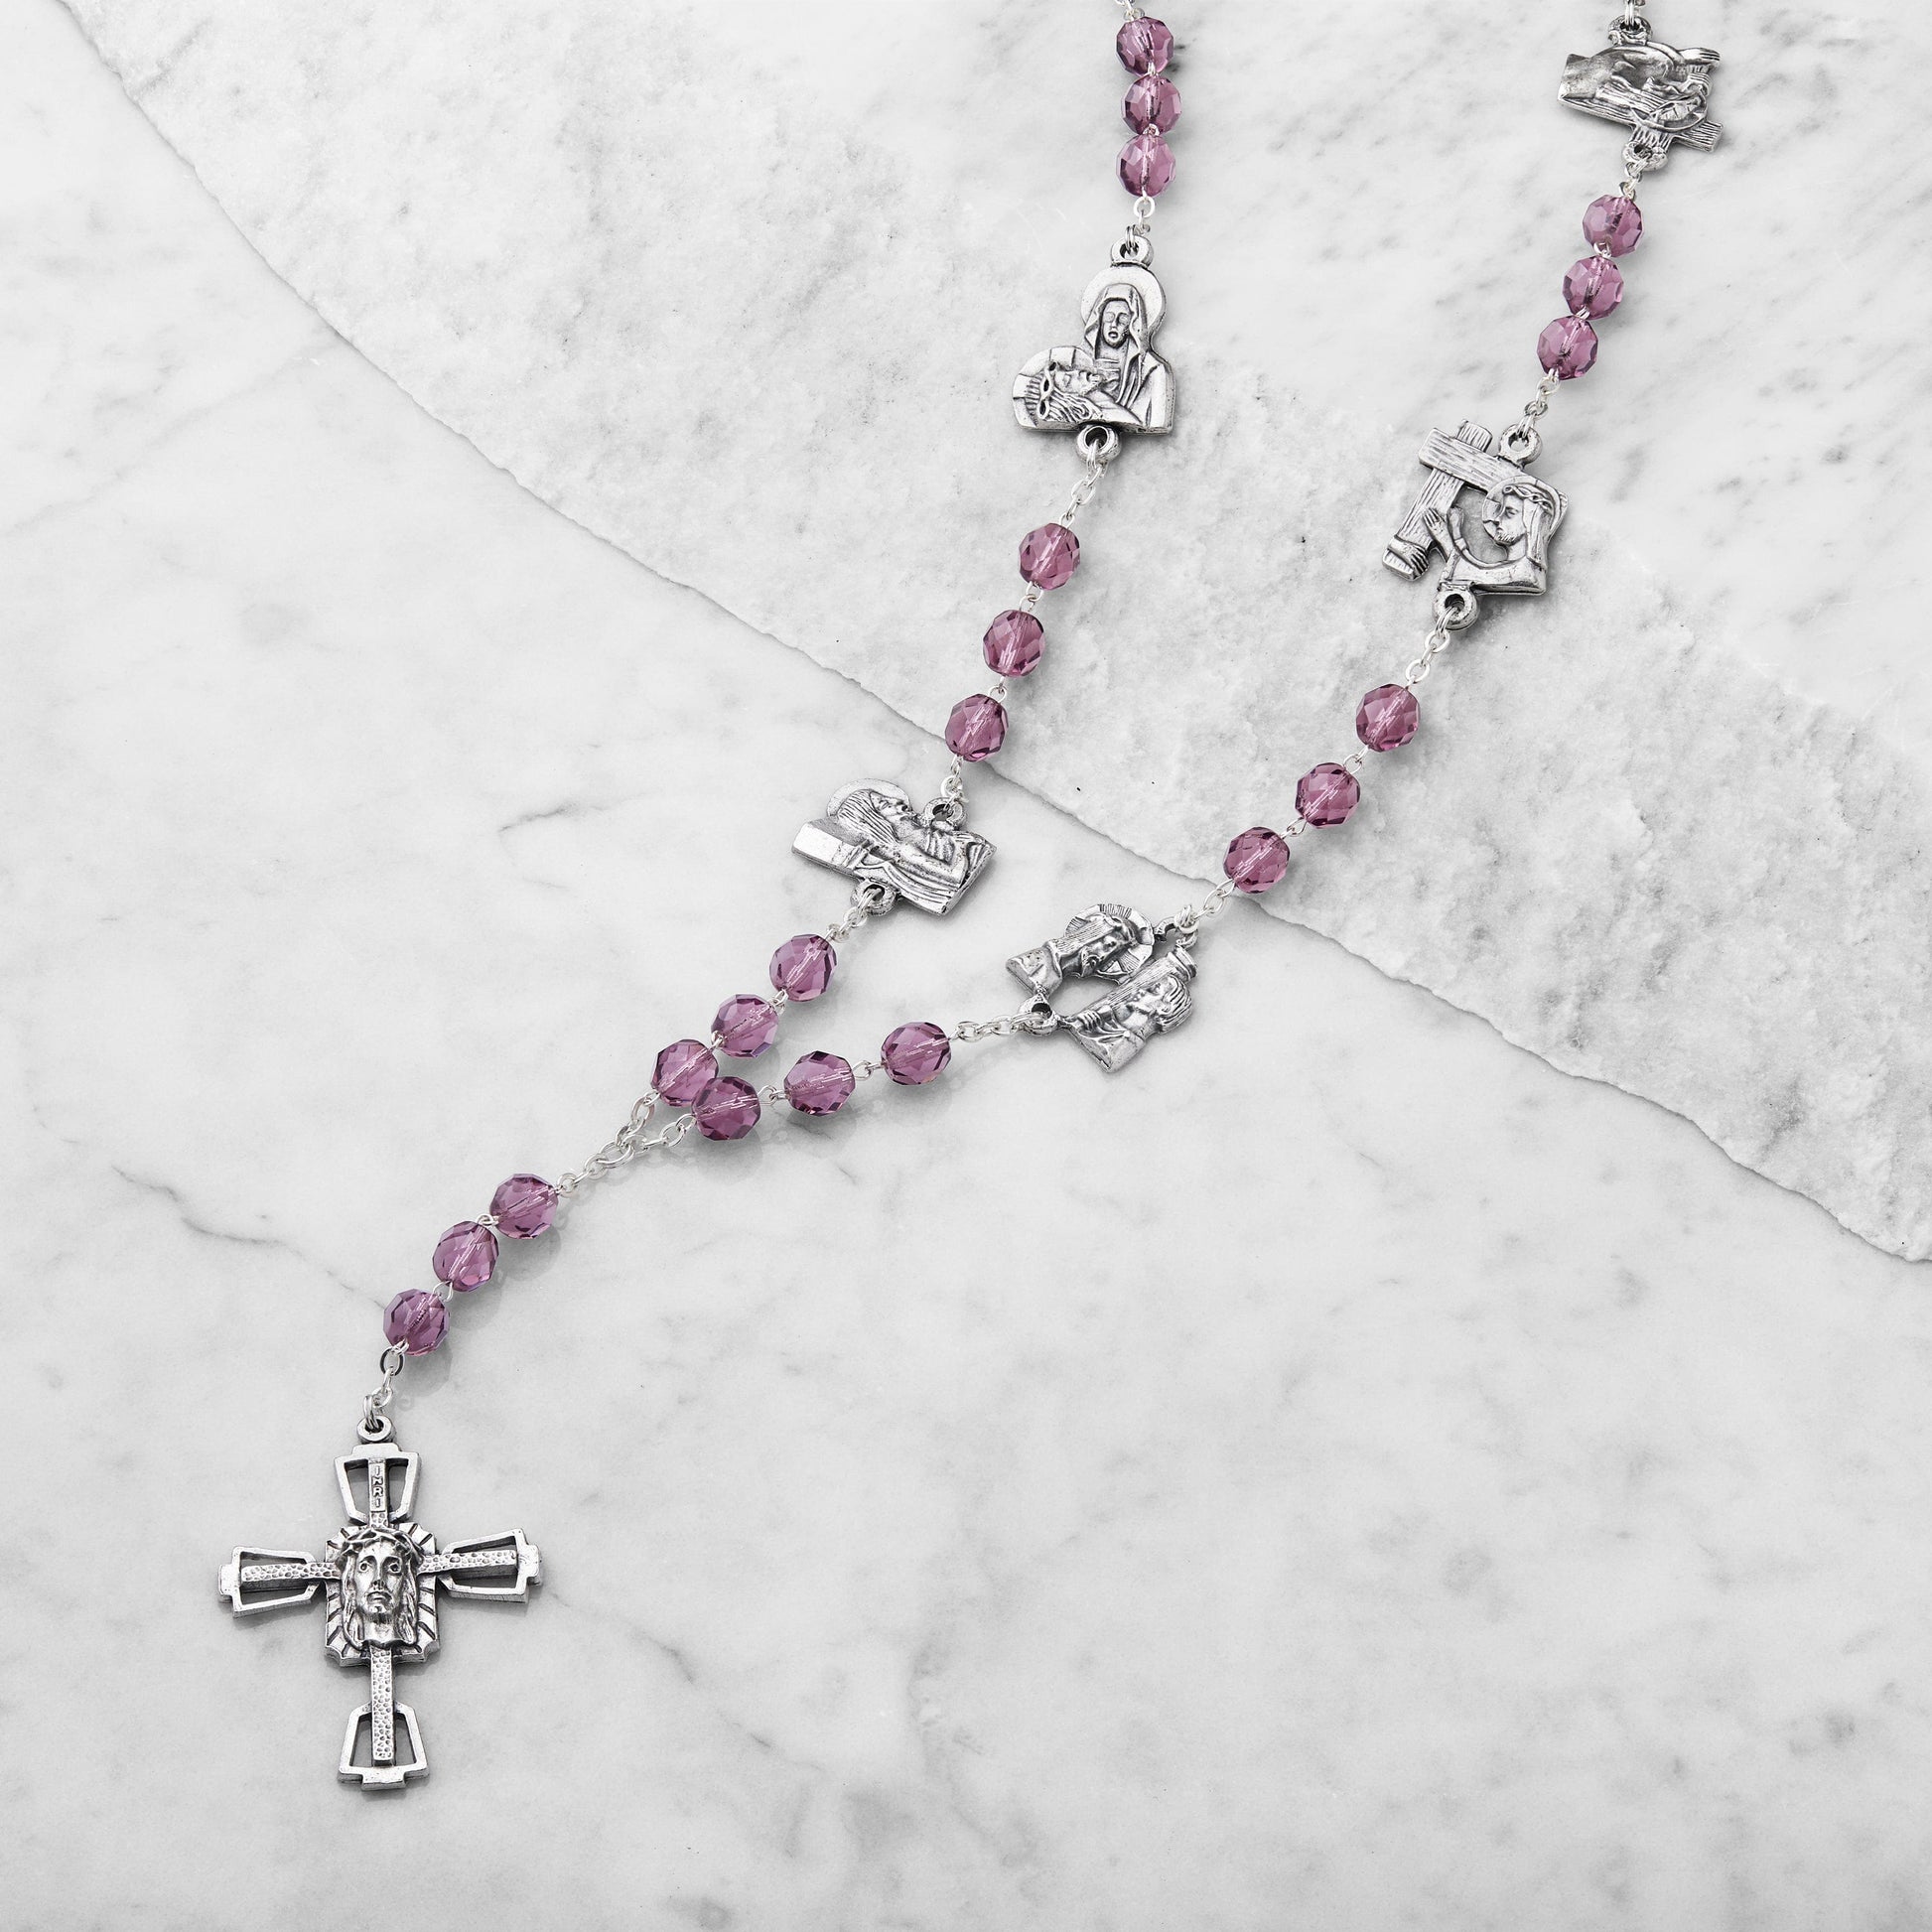 MONDO CATTOLICO Prayer Beads 71 cm (27.95 in) / 7.5 mm (0.29 in) Station of the Cross Rosary in faceted crystal amethyst beads